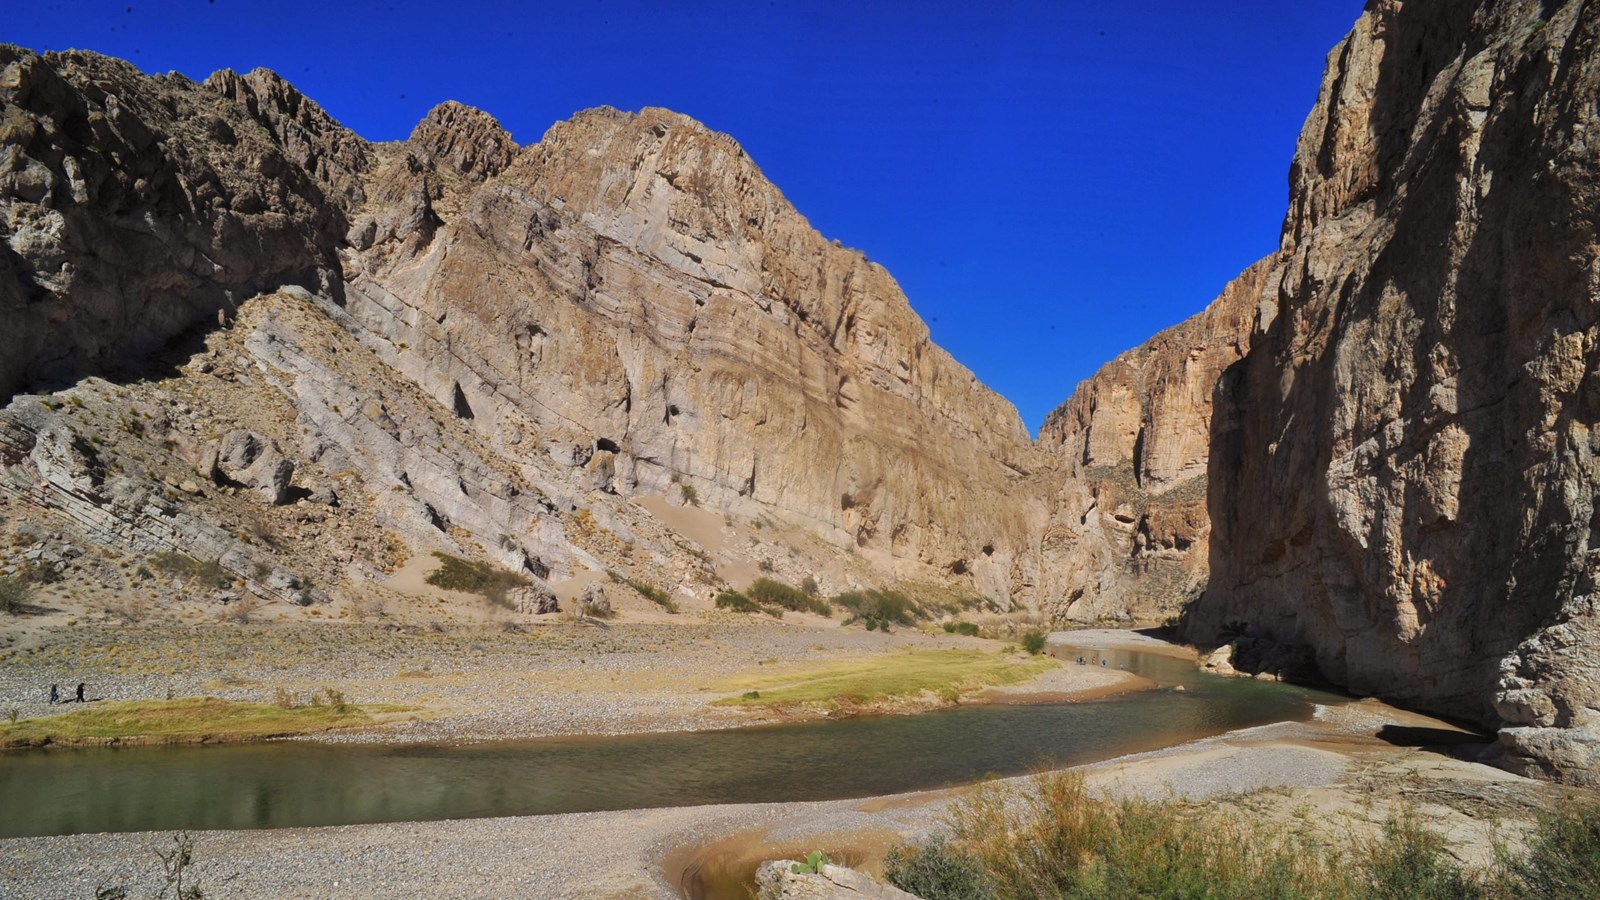 A river flows through high walls of limestone, while hikers walk along the sandy banks.